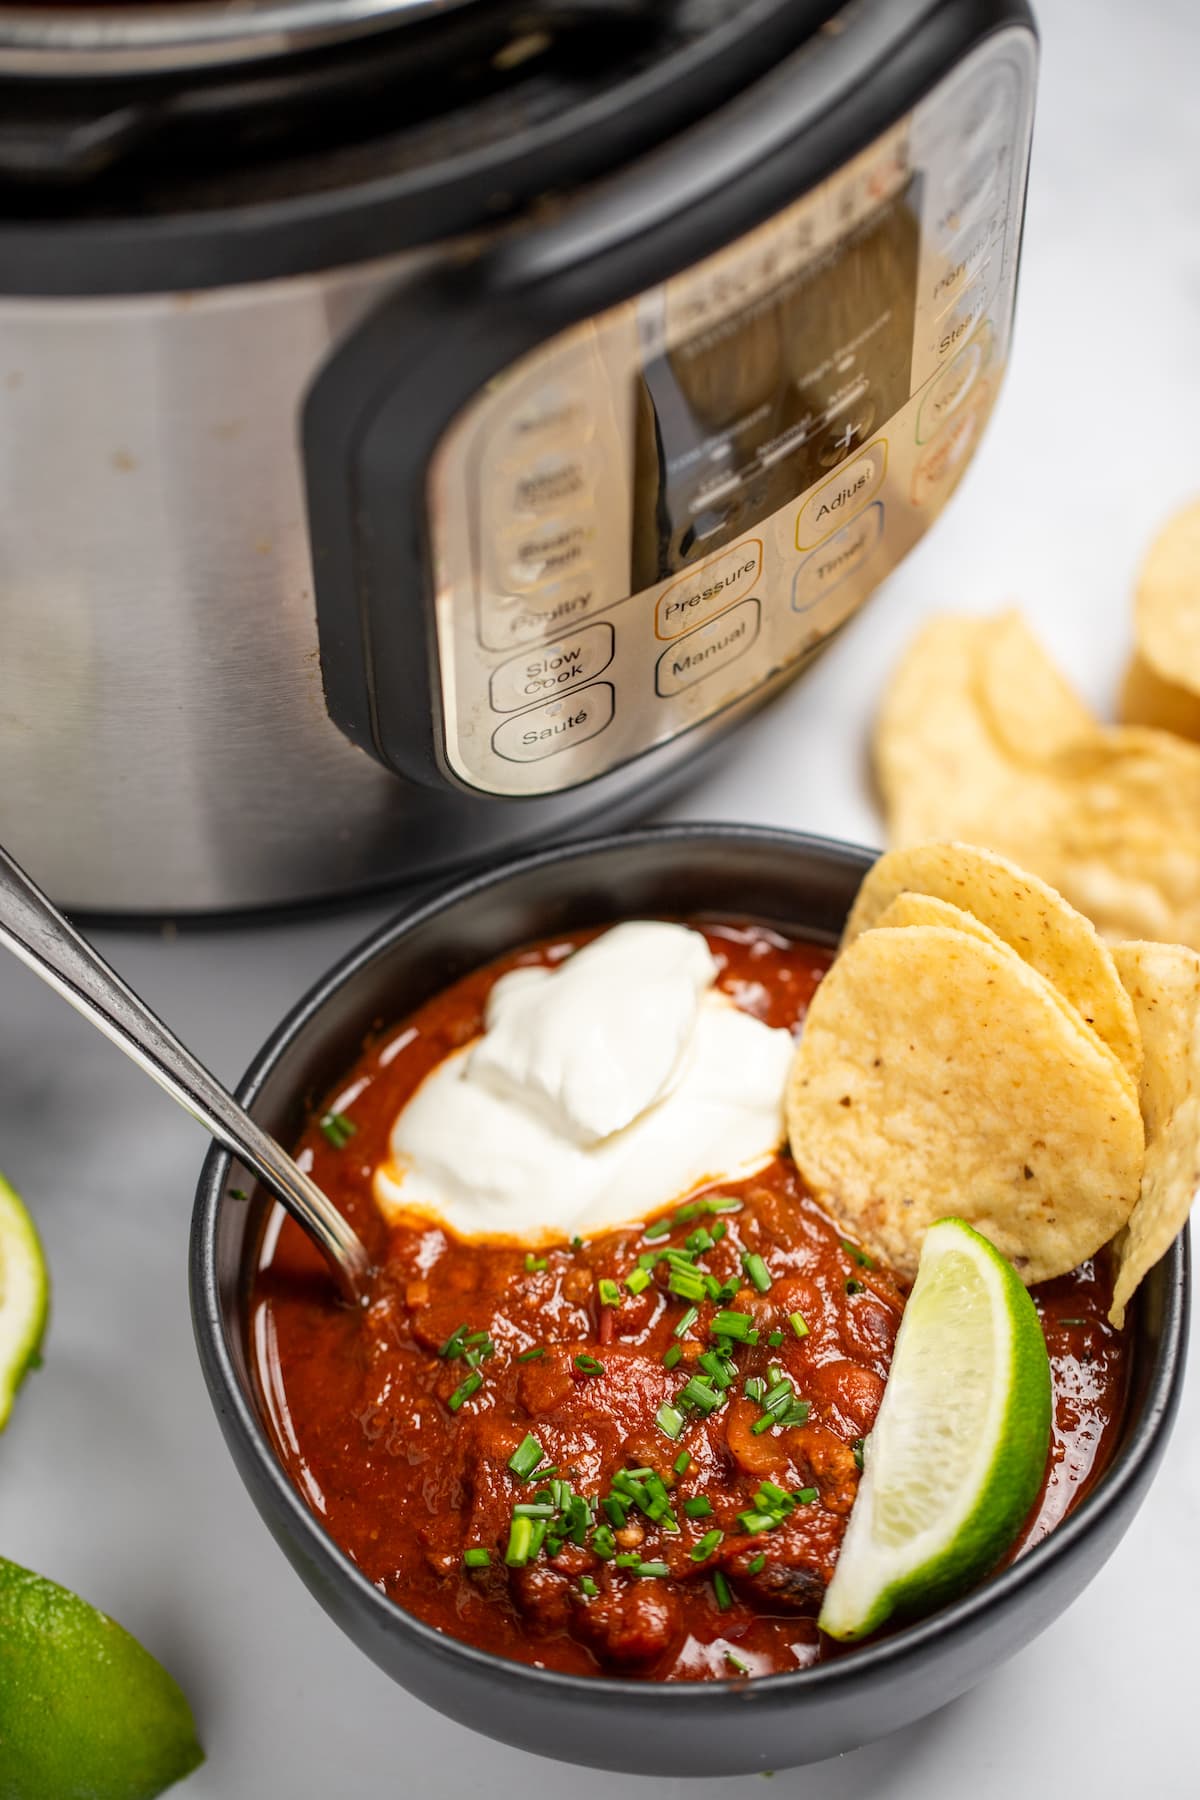 A bowl of chili with a spoon in it, topped with chopped chives, a lime wedge, and round tortilla chips, next to more lime wedges and tortilla chips, in front of an instant pot.